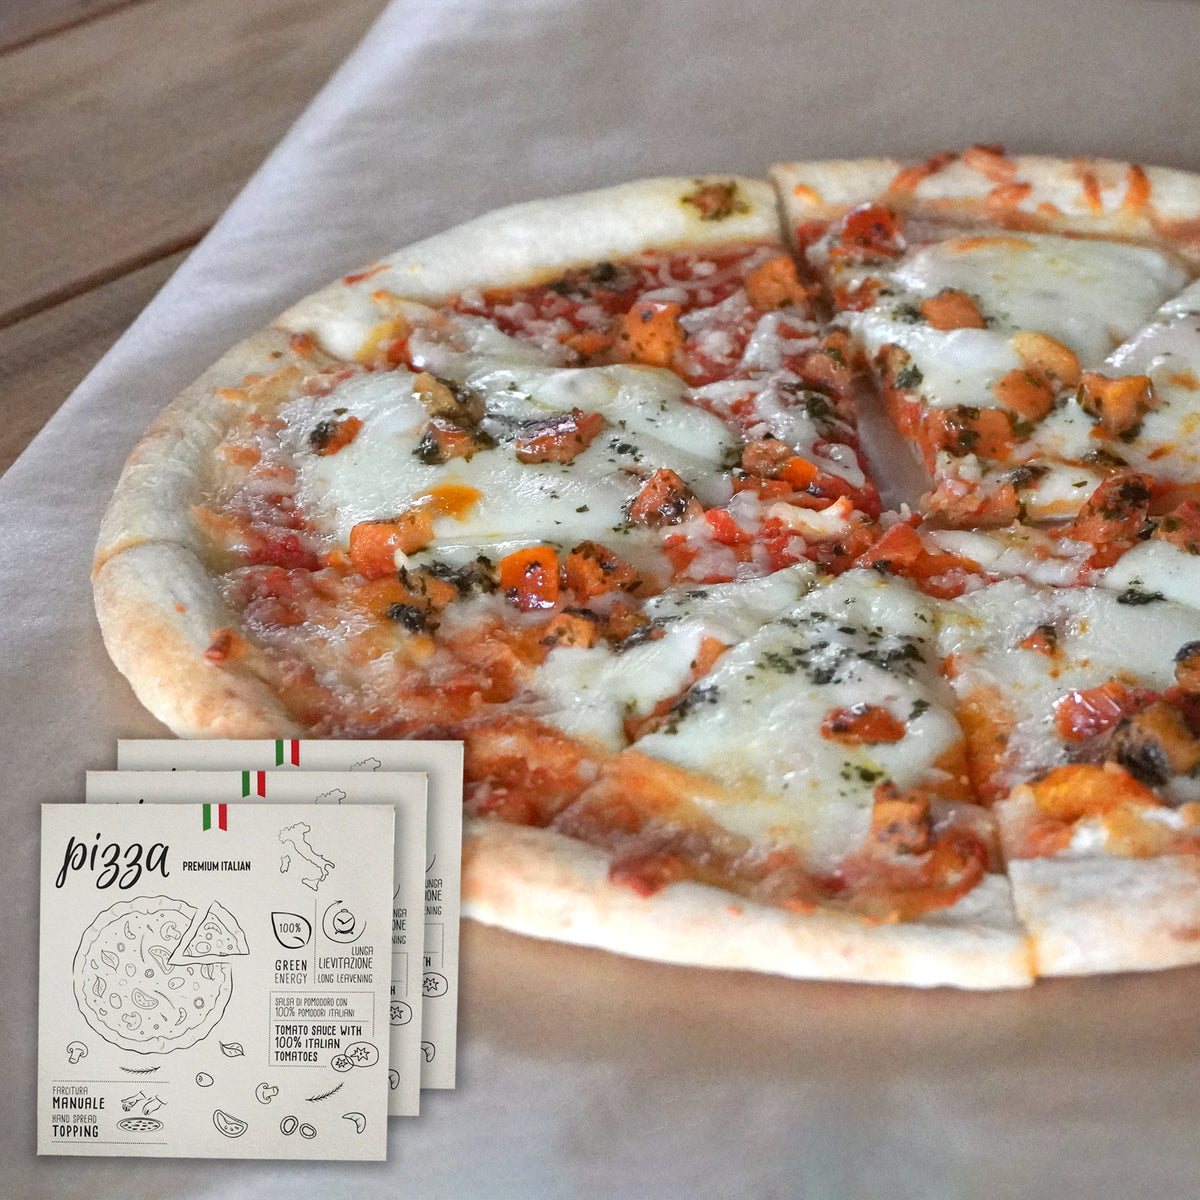 All-Natural Frozen Pizza Margherita from Italy (25cm x 3) - Horizon Farms